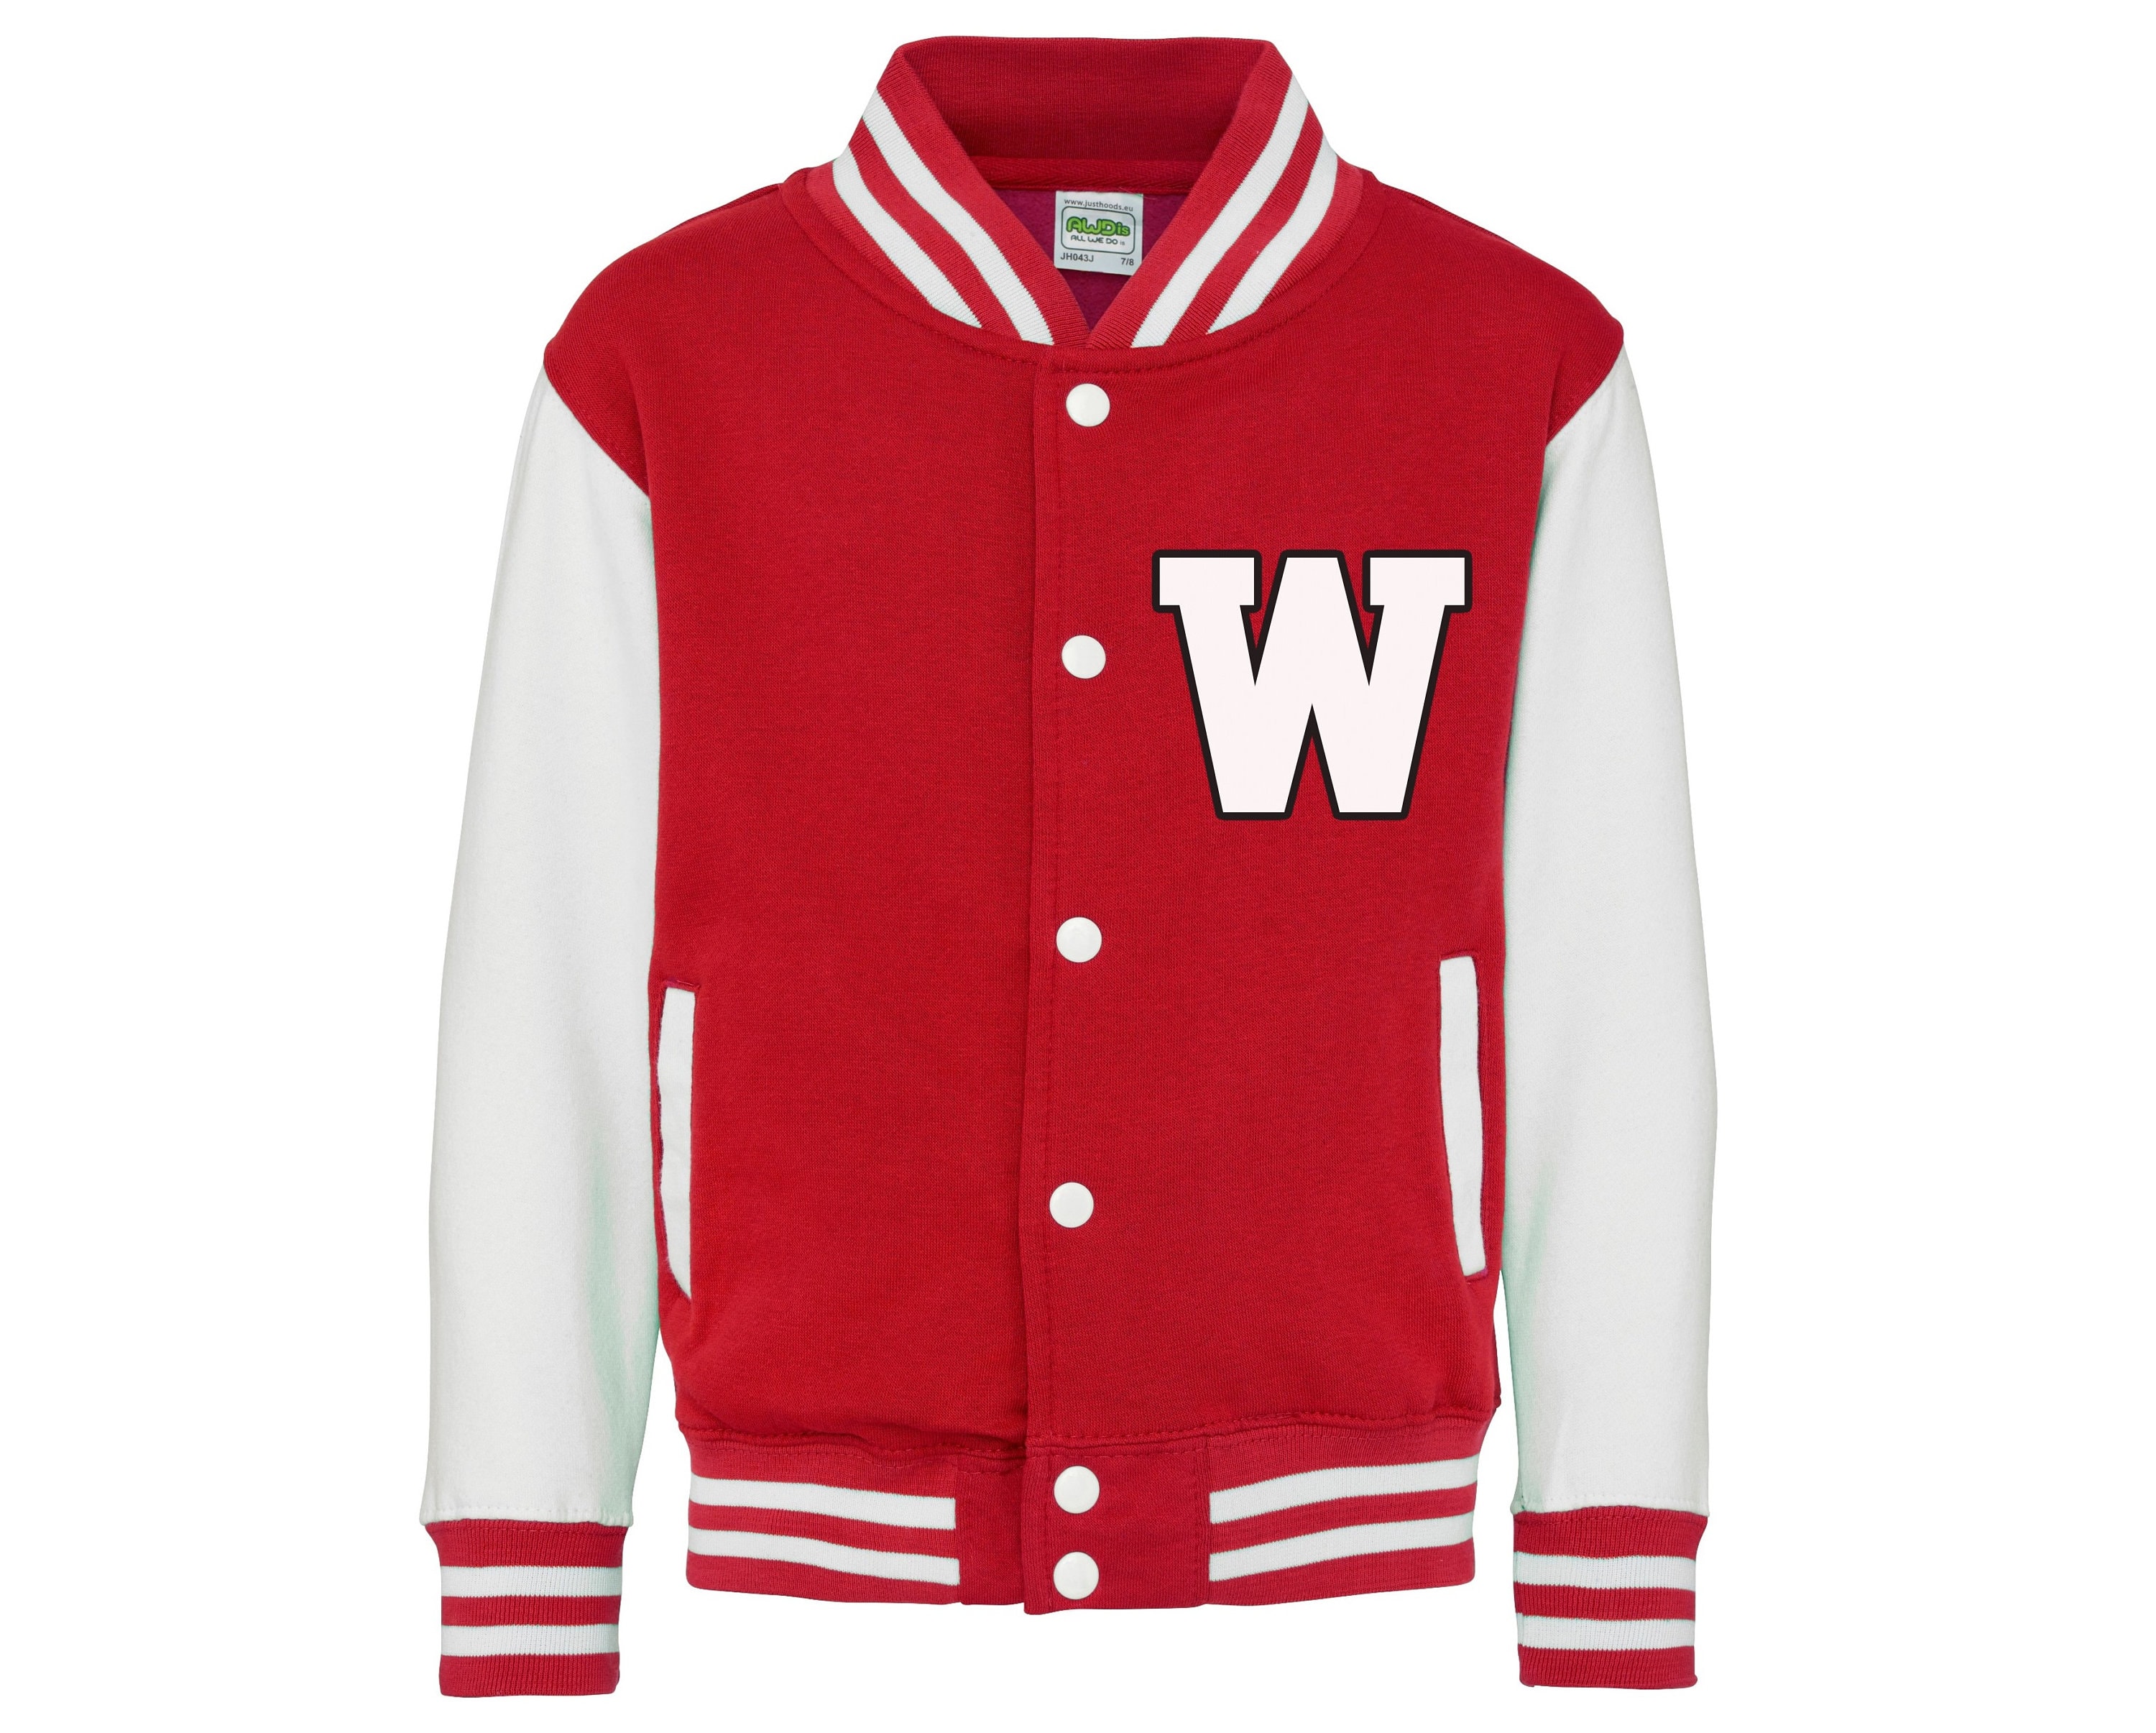 Personalised Red Varsity Jacket With Yellow Letter and White 